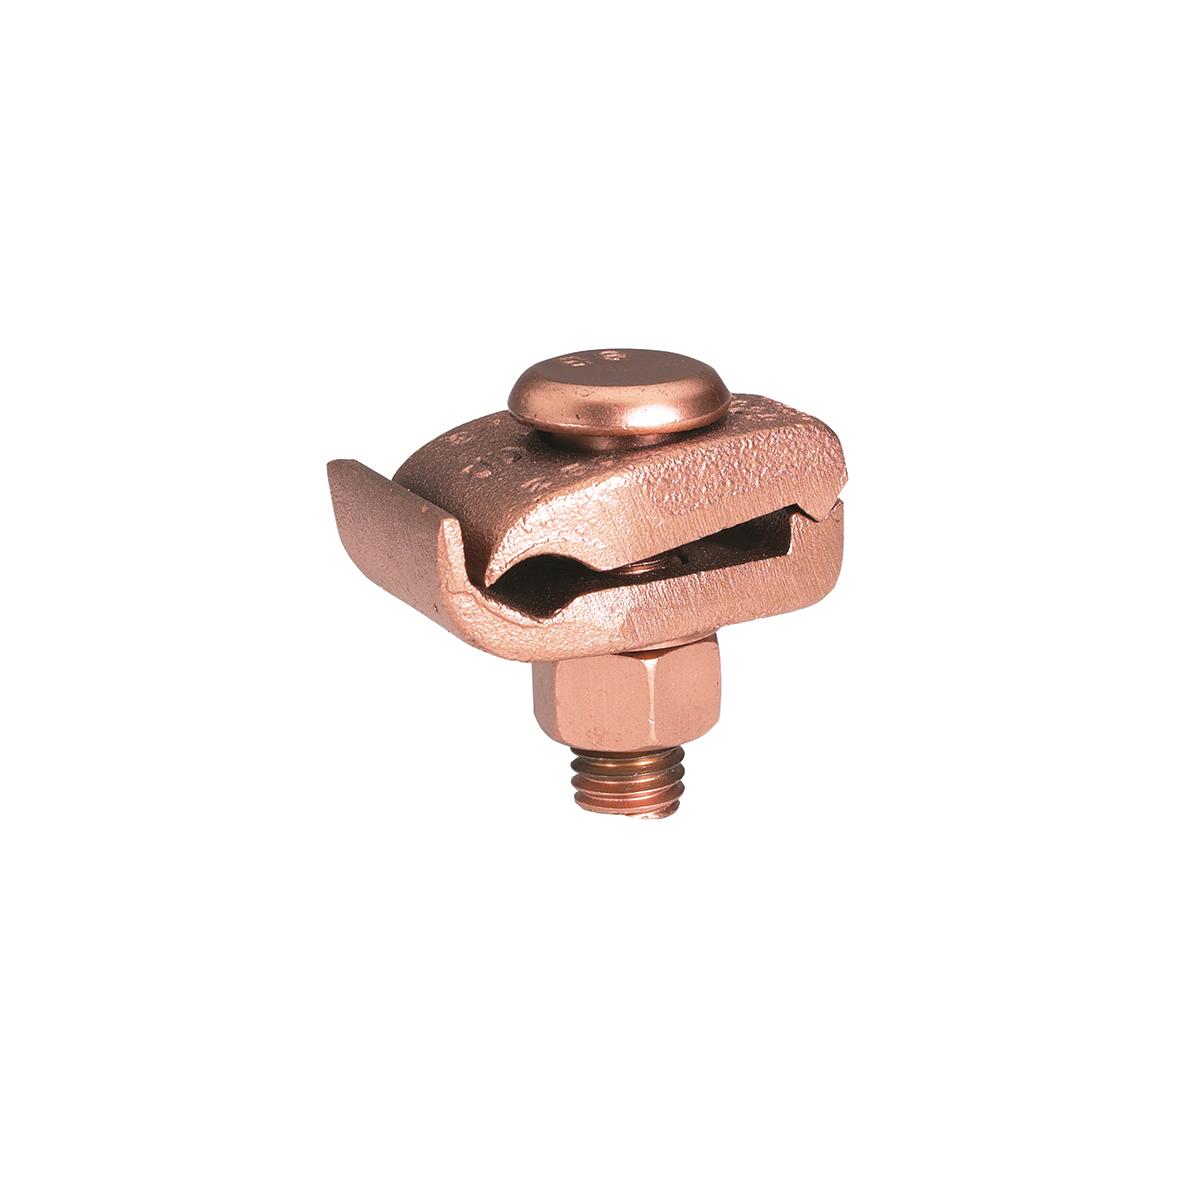 Hubbell GB26 Mechanical Grounding Connector, Cable to 1/4" Thick Bar, 4 AWG (Sol)-2/0 AWG (Str), 3/8" Stud, 1-1/2 IN Width.  ; Features: High Copper Alloy Ground Connector For Joining A Range Of Cable To 1/4 IN Thick Bar, Type GB Separates Cable From Bar, One-Wrench I